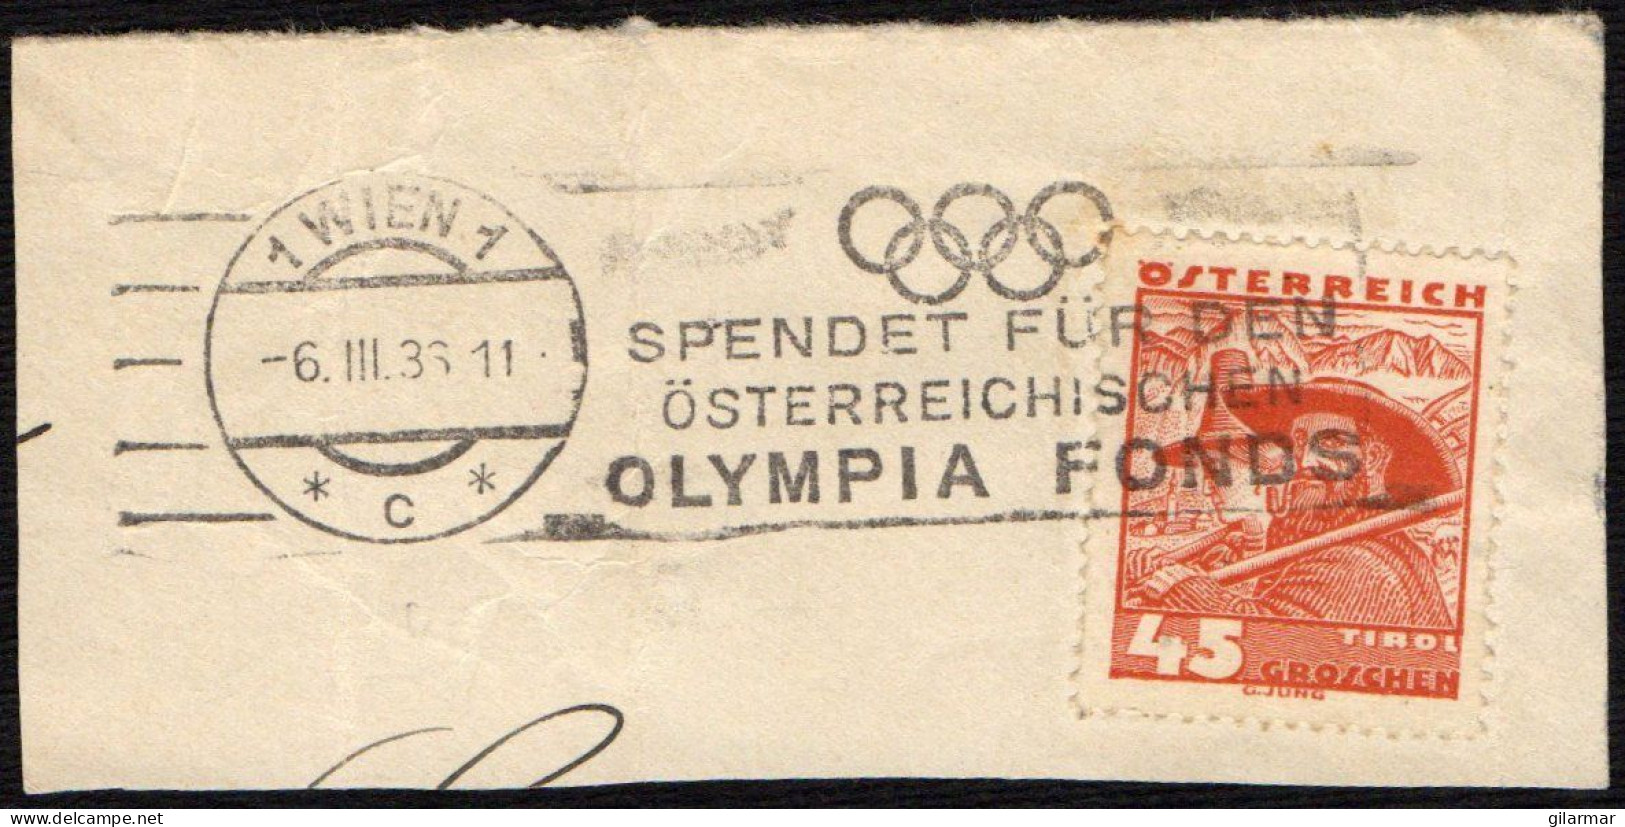 OLYMPIC GAMES 1936 - AUSTRIA WIEN 1 C 1935 - DONATE TO THE AUSTRIAN OLYMPIC FUND - FRAGMENT Cm 10x4,80 - M - Summer 1936: Berlin